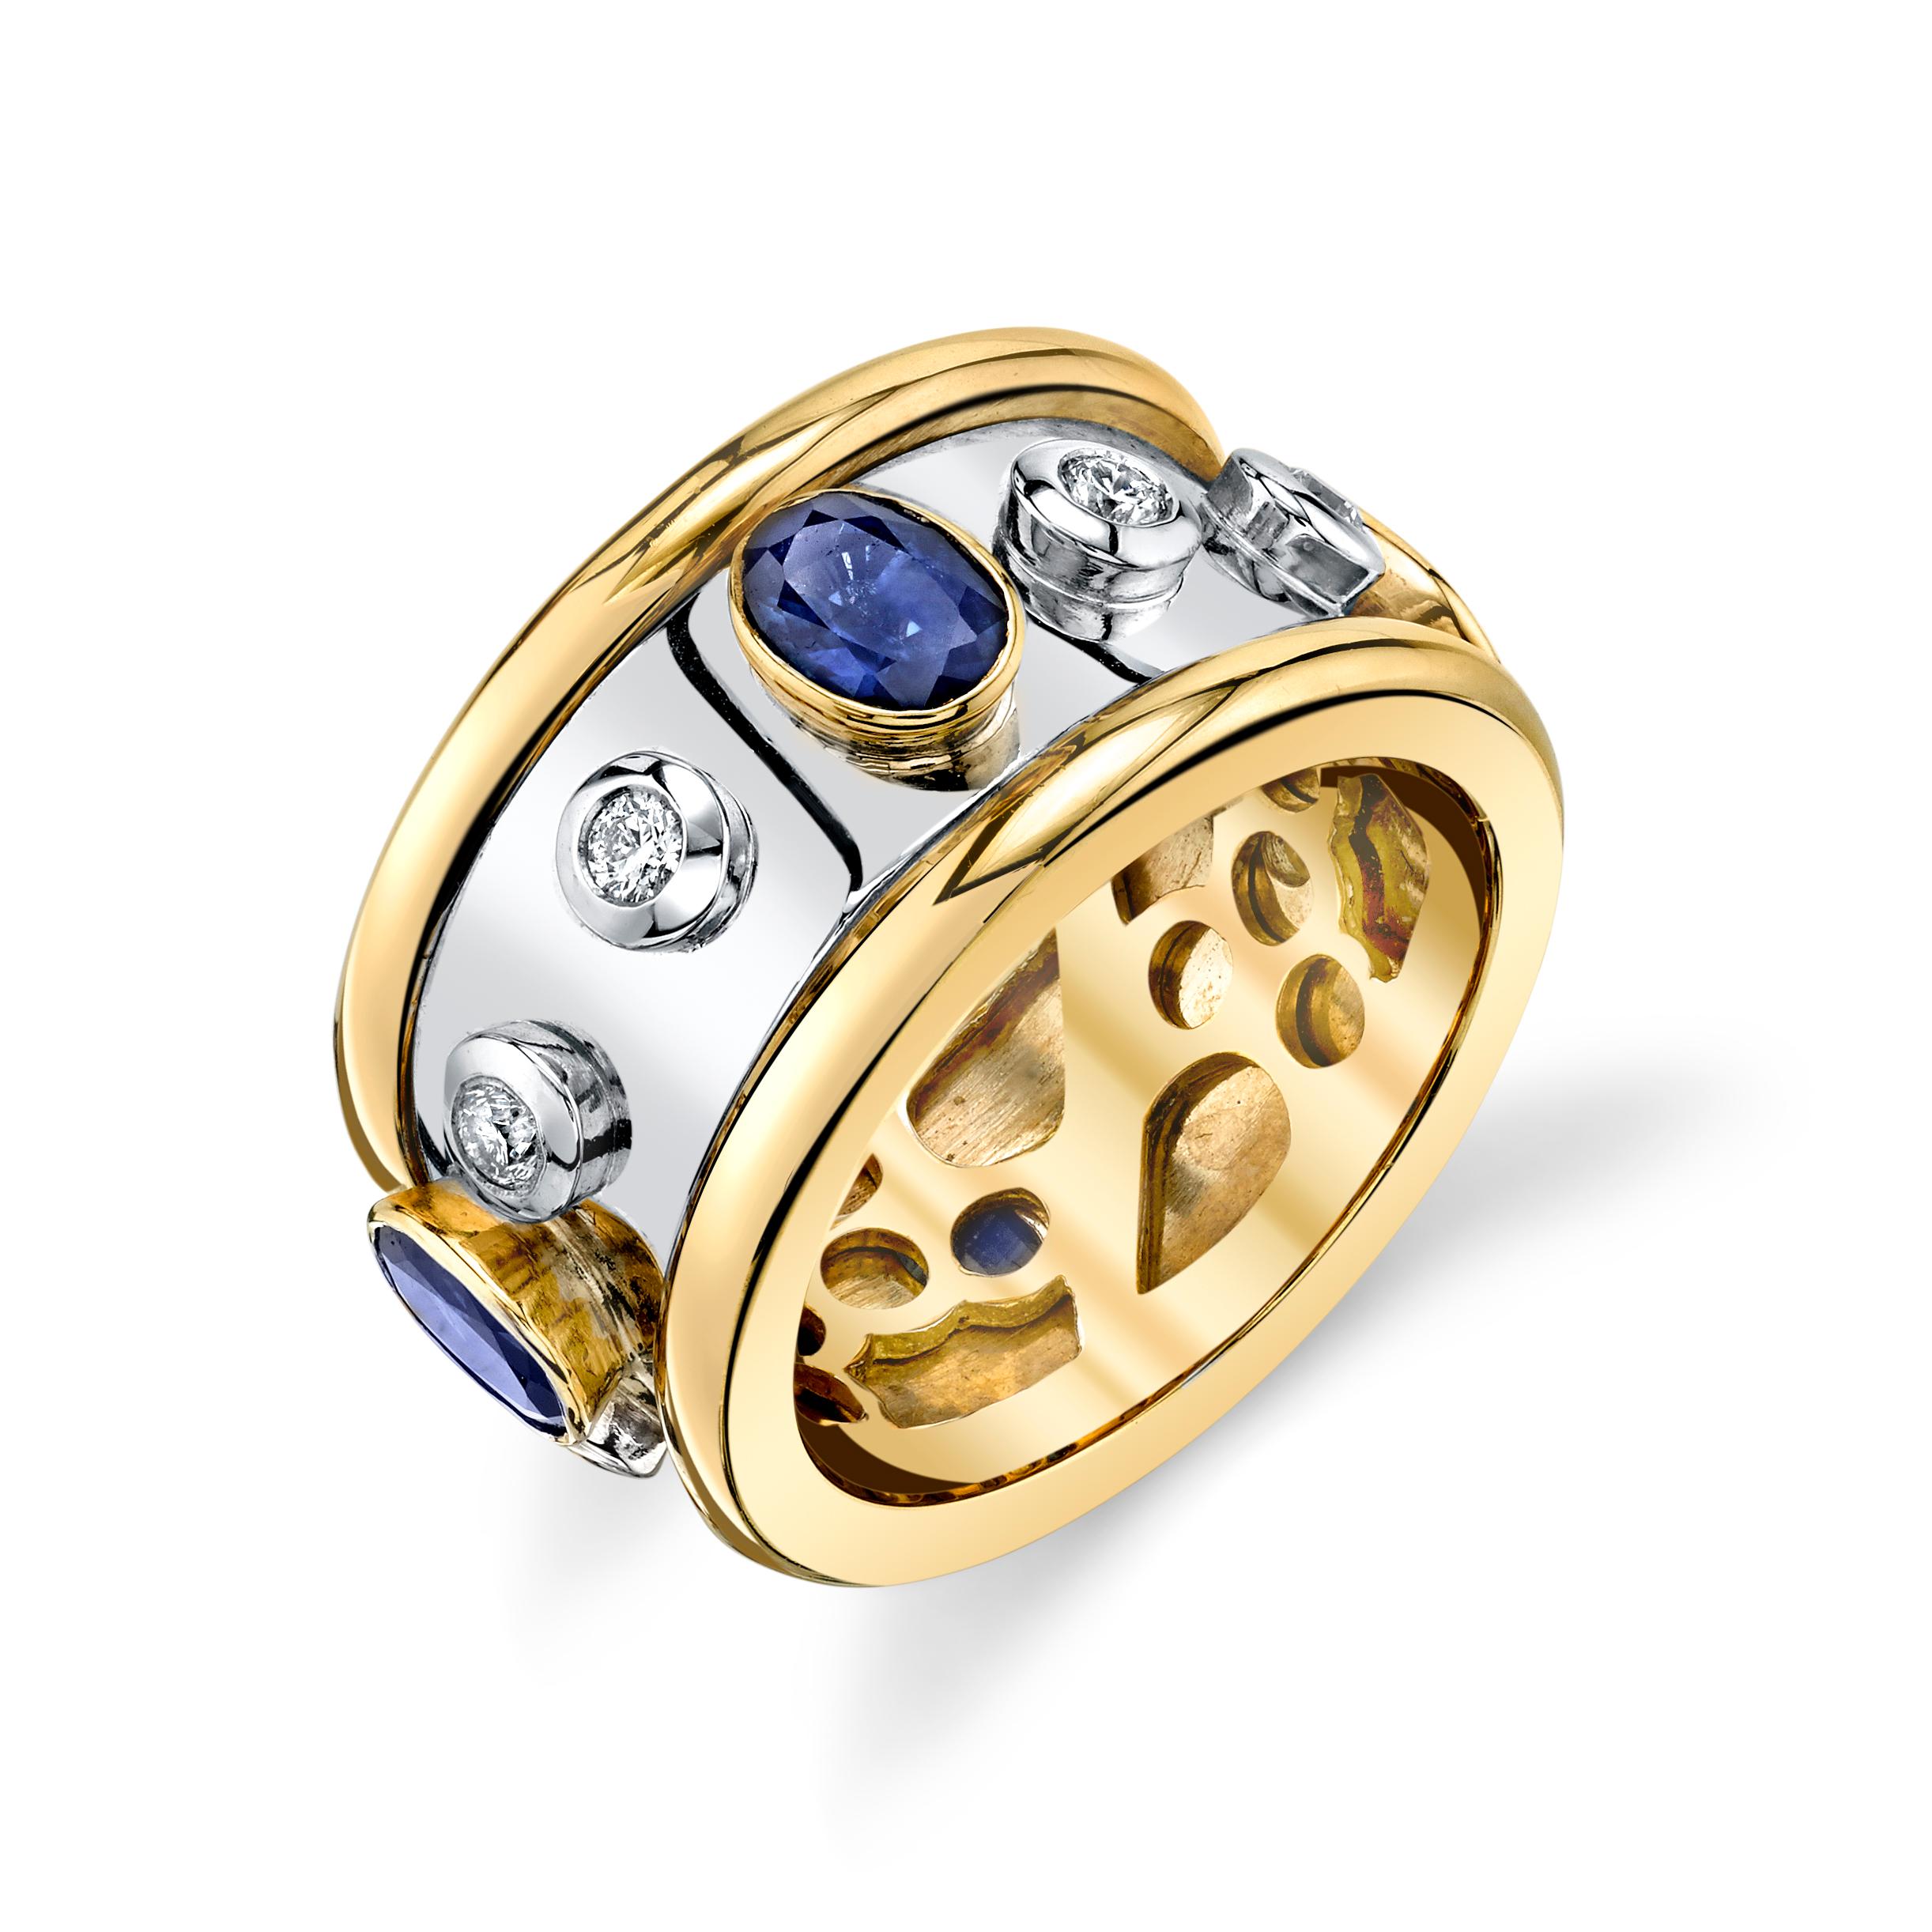 Oval Cut Sapphire and Diamond Eternity Band in White and Yellow Gold, 1.84 Carats Total For Sale